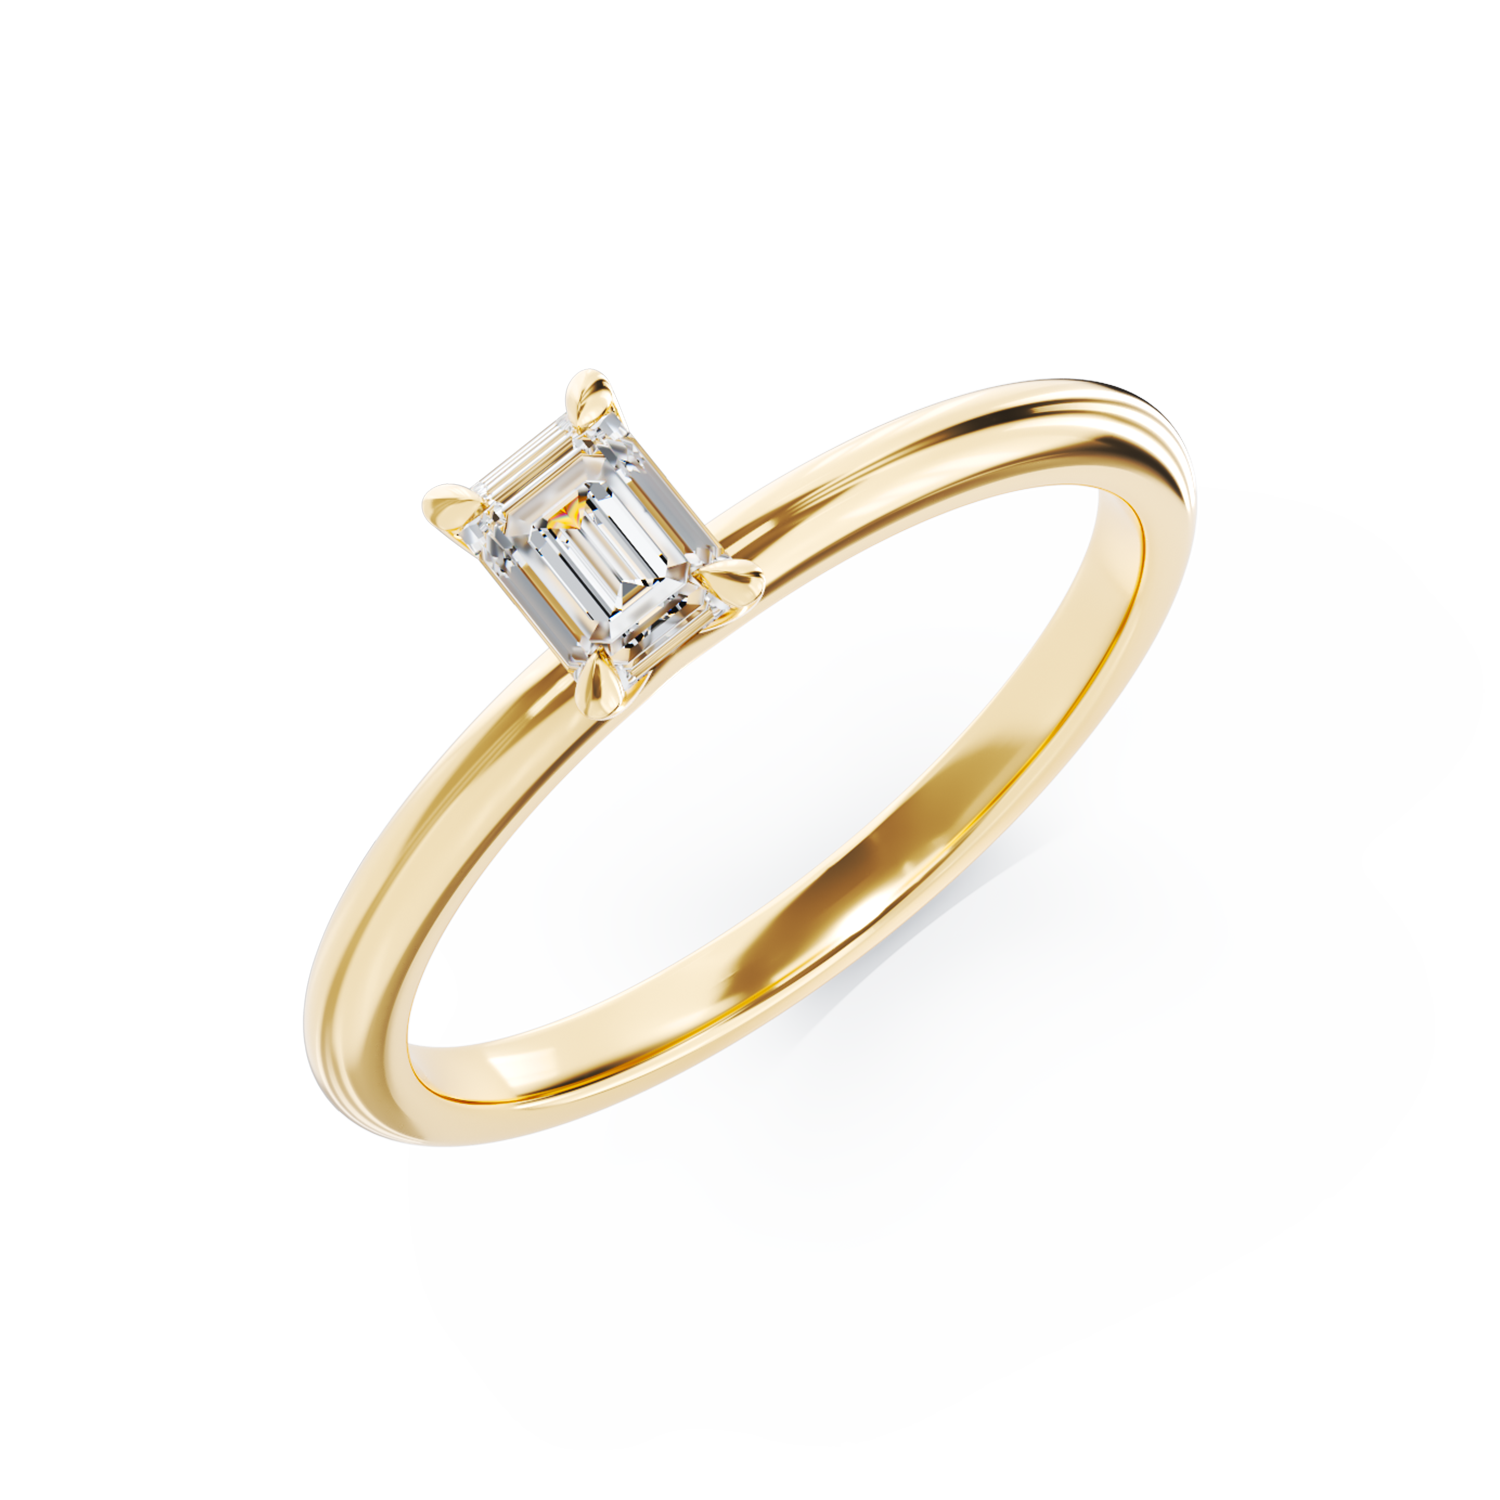 18k yellow gold engagement ring with 0.3ct Solitaire diamond